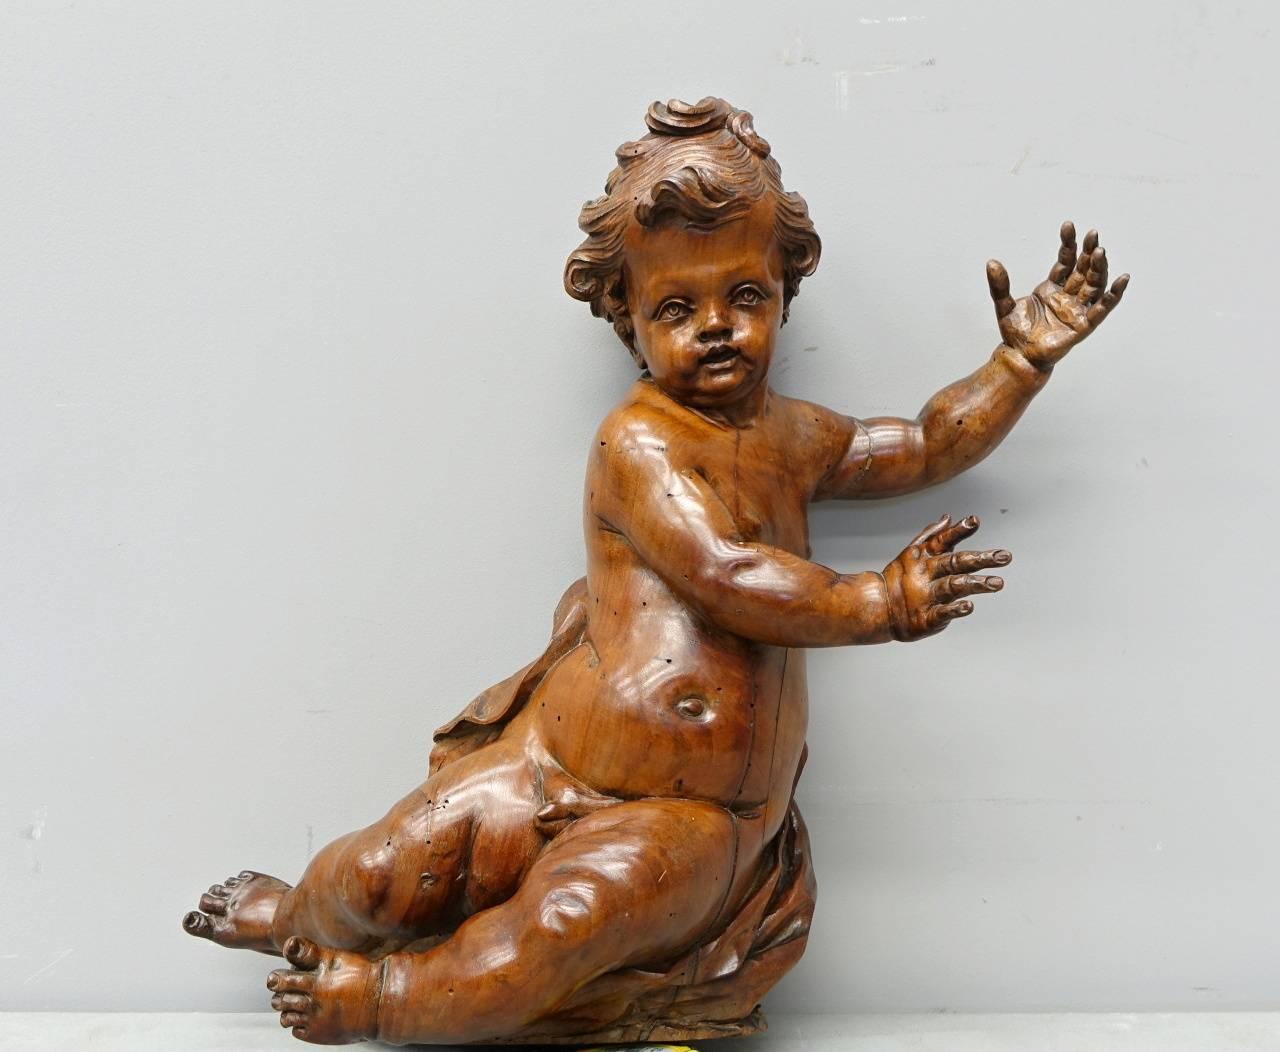 Two putti 
sculpted walnut 

Andrea Brustolon (Belluno, Italy 1662-1732) was one of the most important sculptors of the Venetian Barocco period. Honoré de Balzac defined him as the Michelangelo of wood. In his early youth he was a pupil of